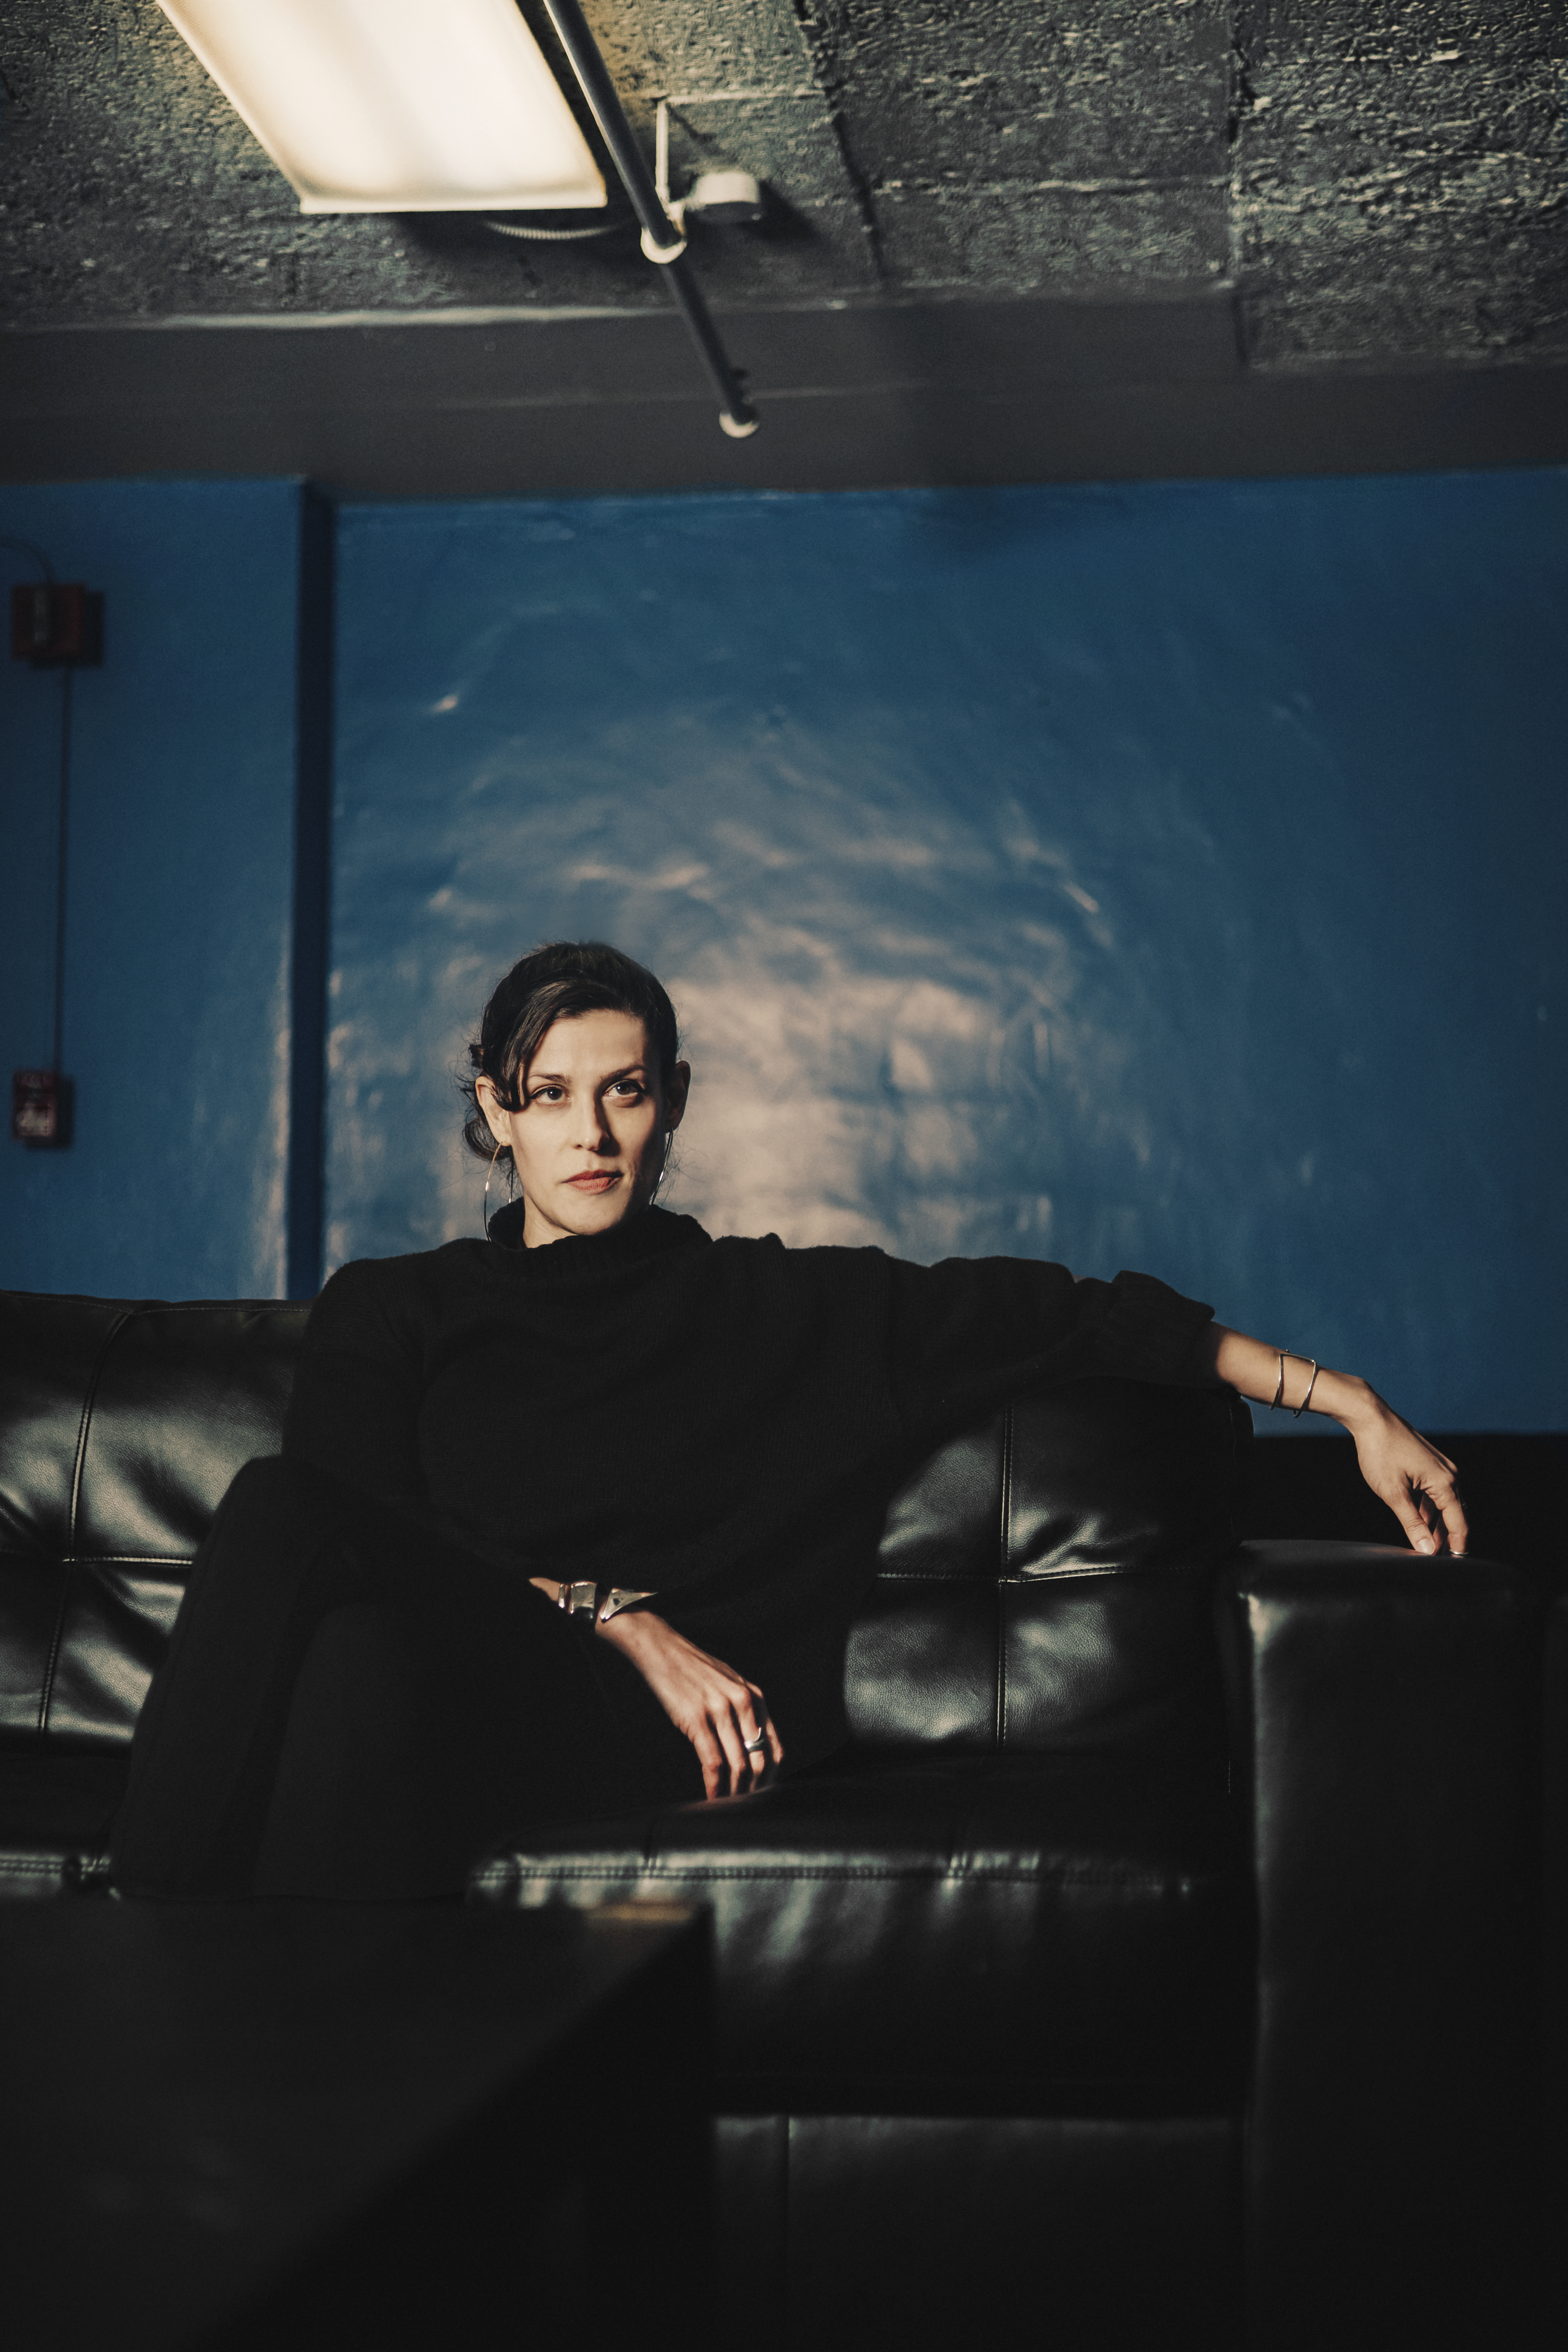 Artist Dessa on music, writing and her unique performance art